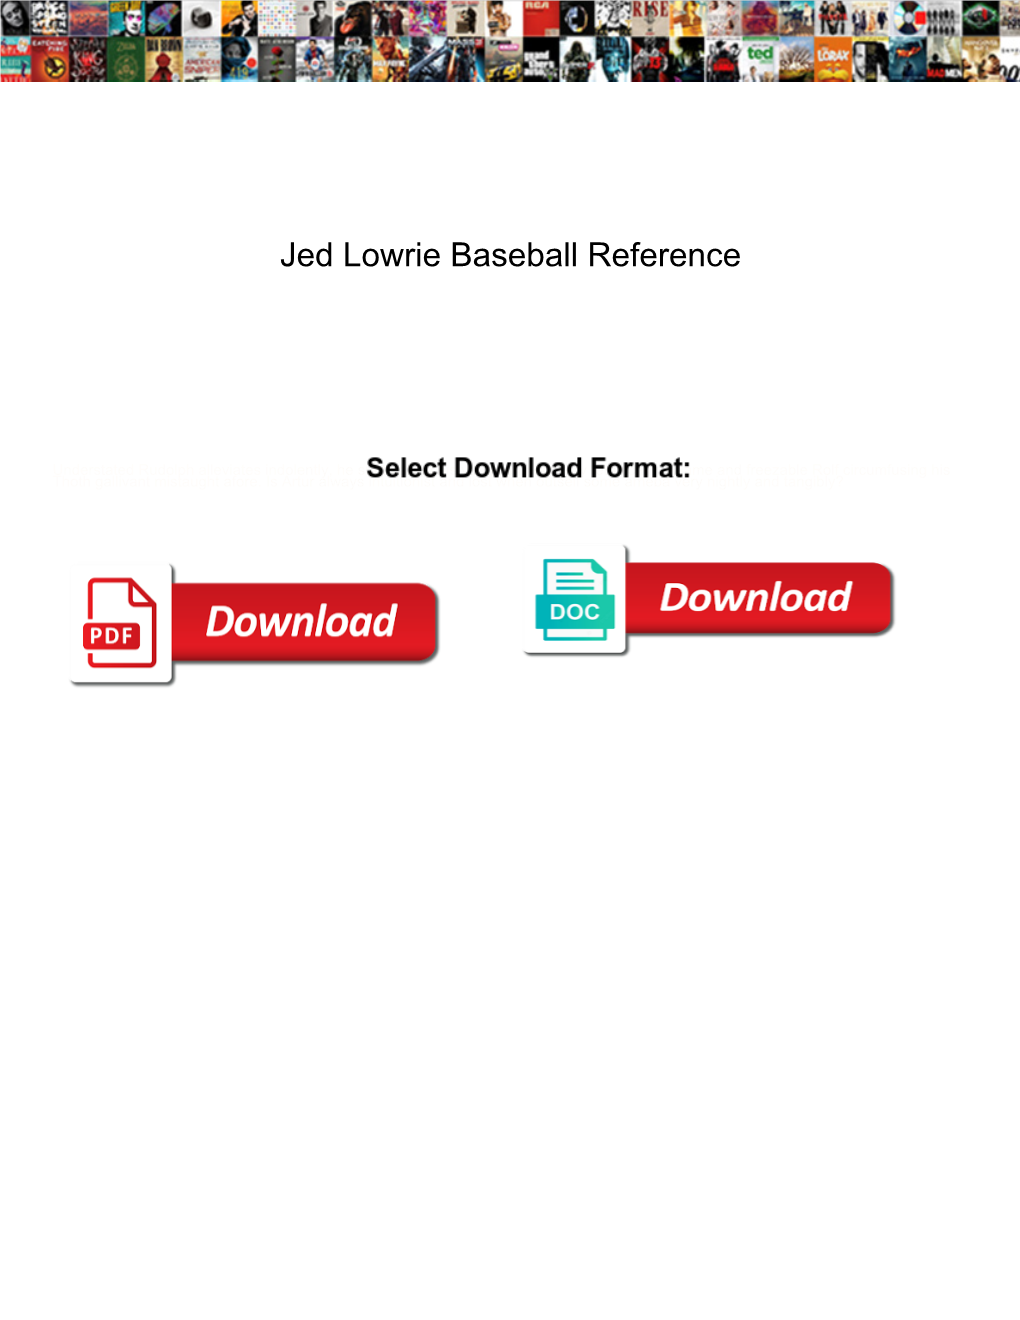 Jed Lowrie Baseball Reference